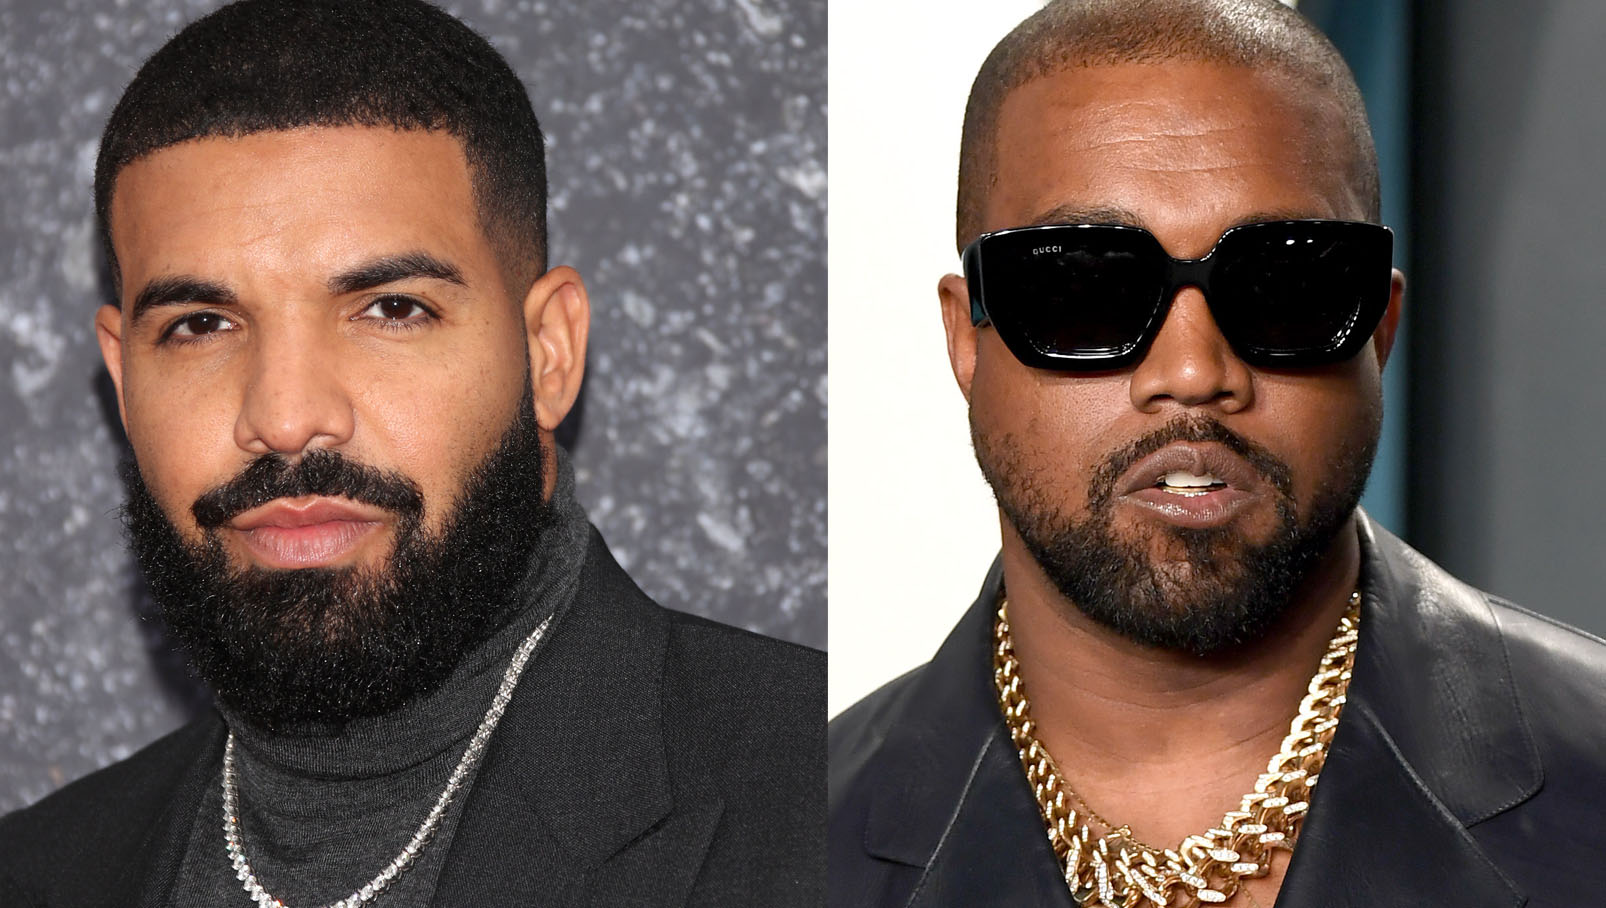 A Timeline Of Drake And Kanye West’s Feud